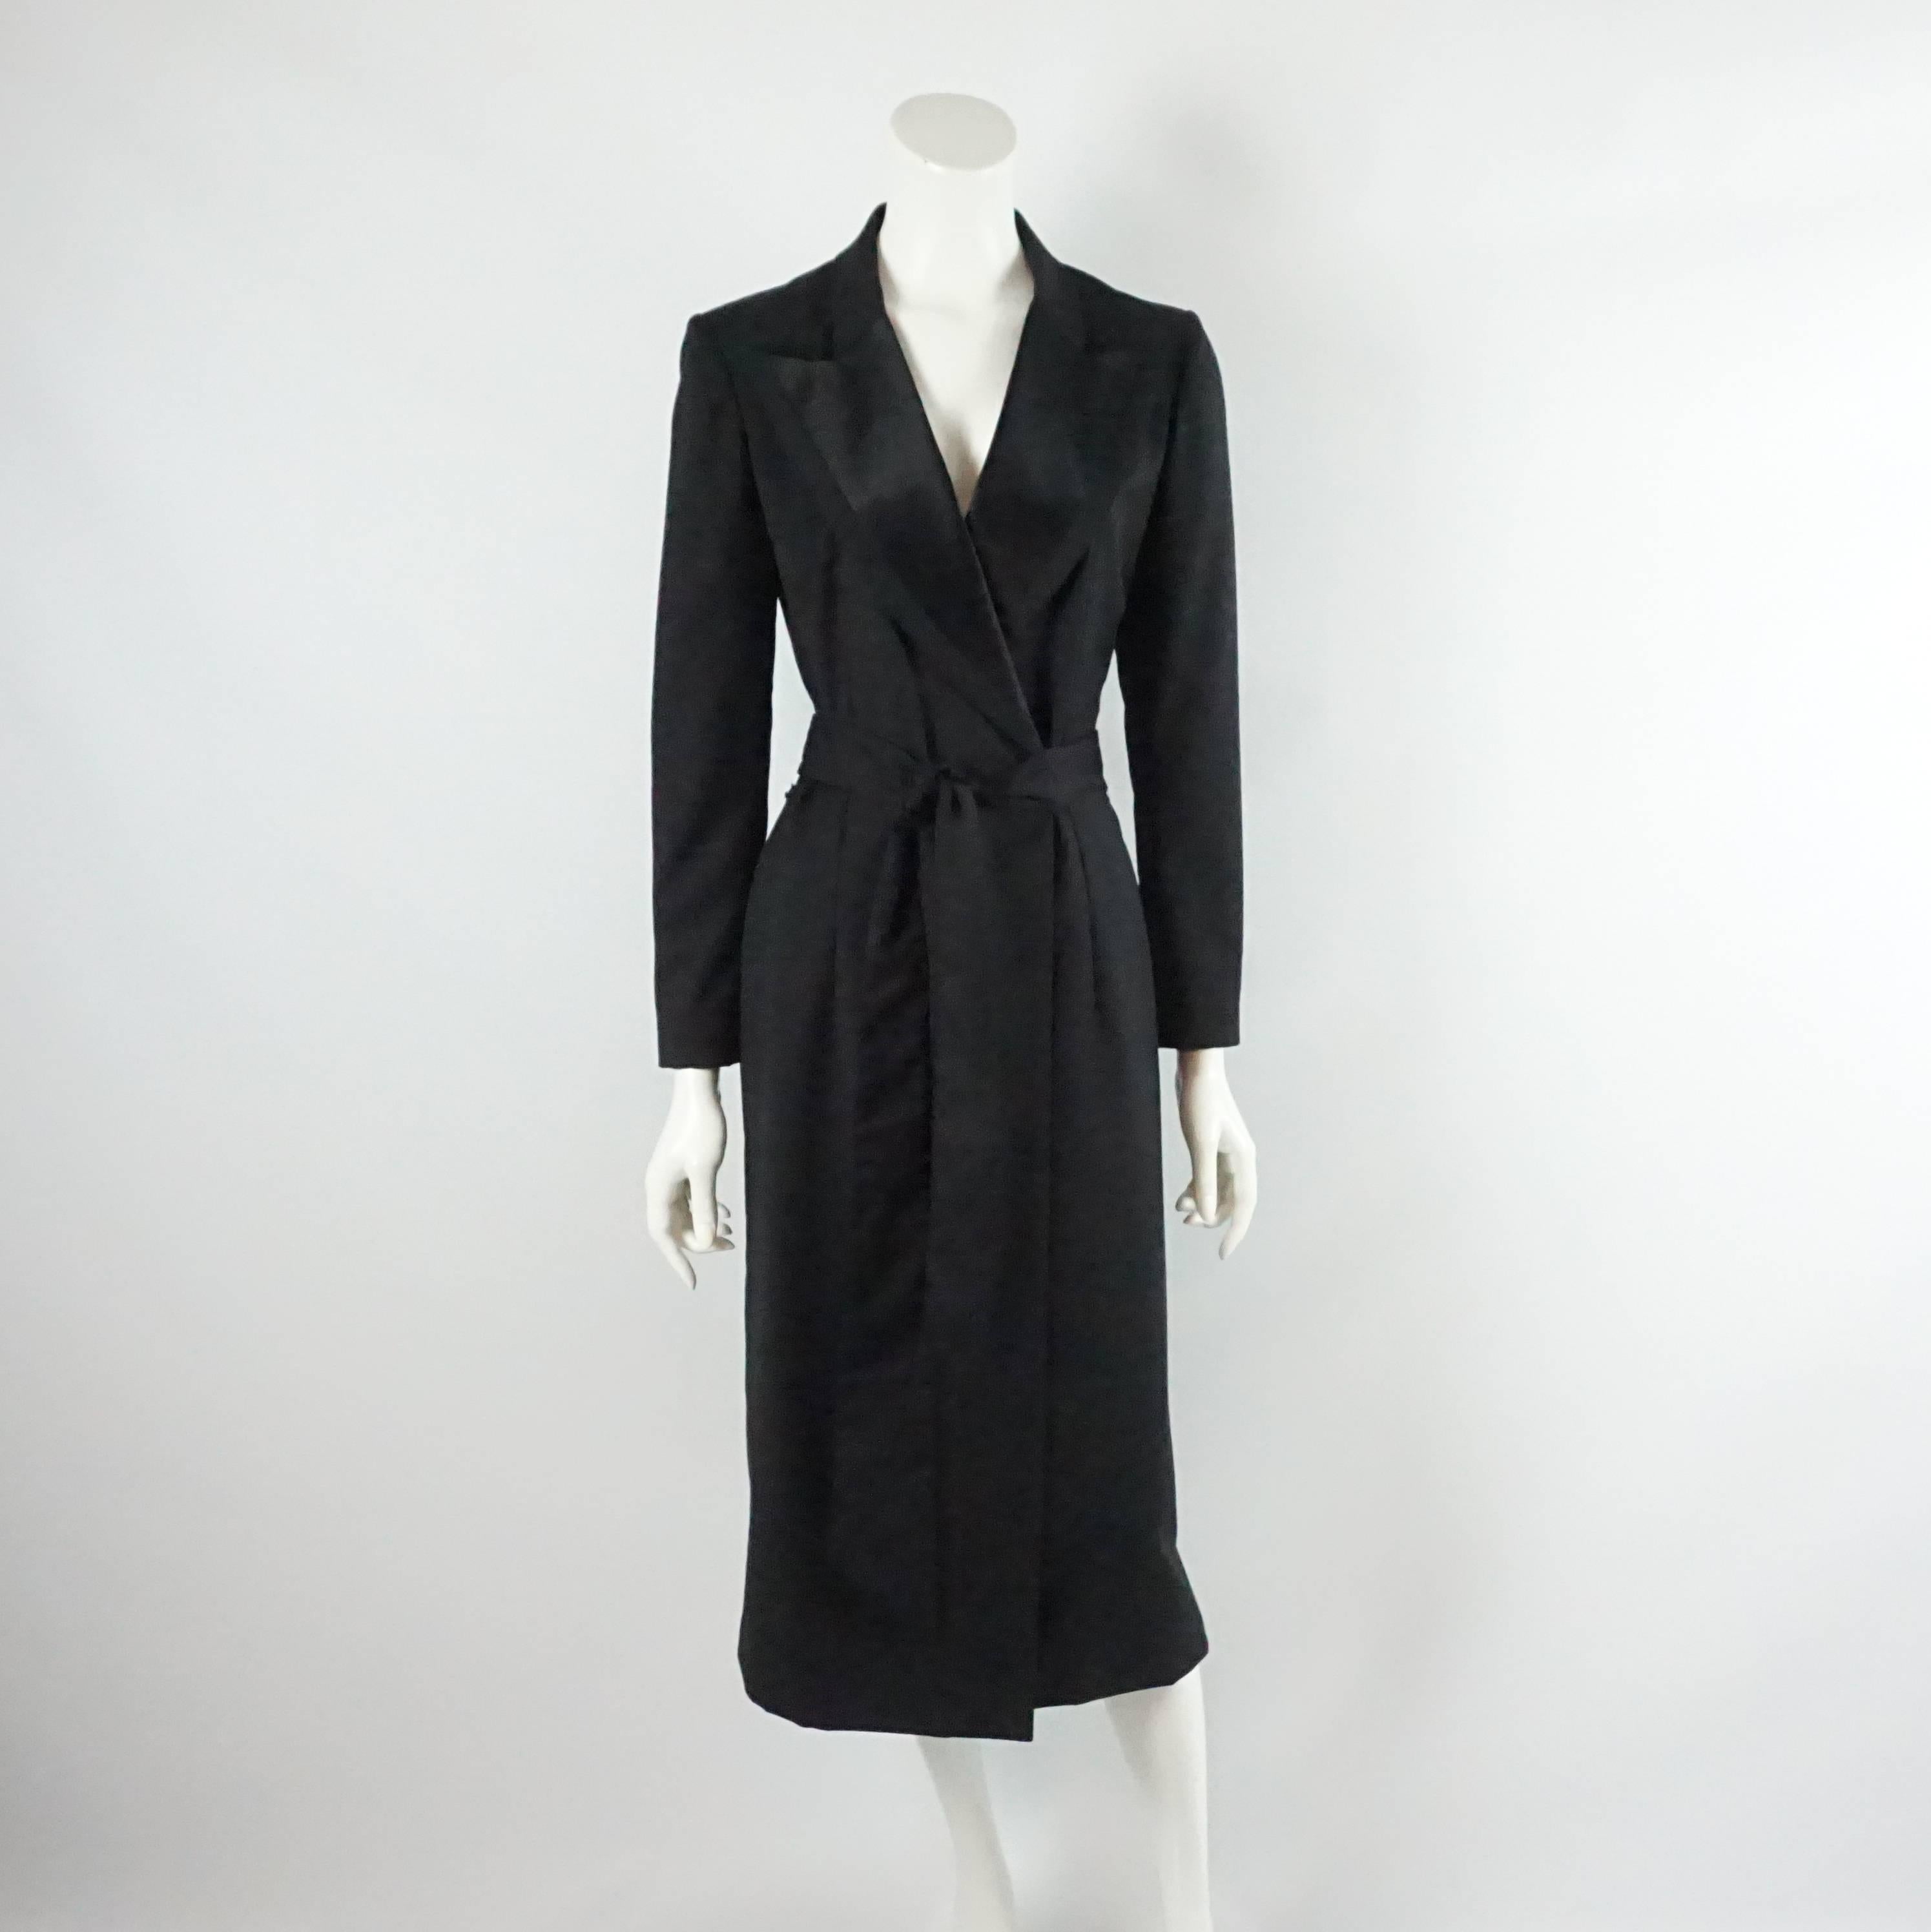 Chloe Black Wool Tuxedo Style Coat with Satin Collar - 38. This coat is a classic show stopper and a very versatile staple. It is a 3/4 length with a tapered fit, wrap style front, and belt. The piece is in very good condition with light wear and